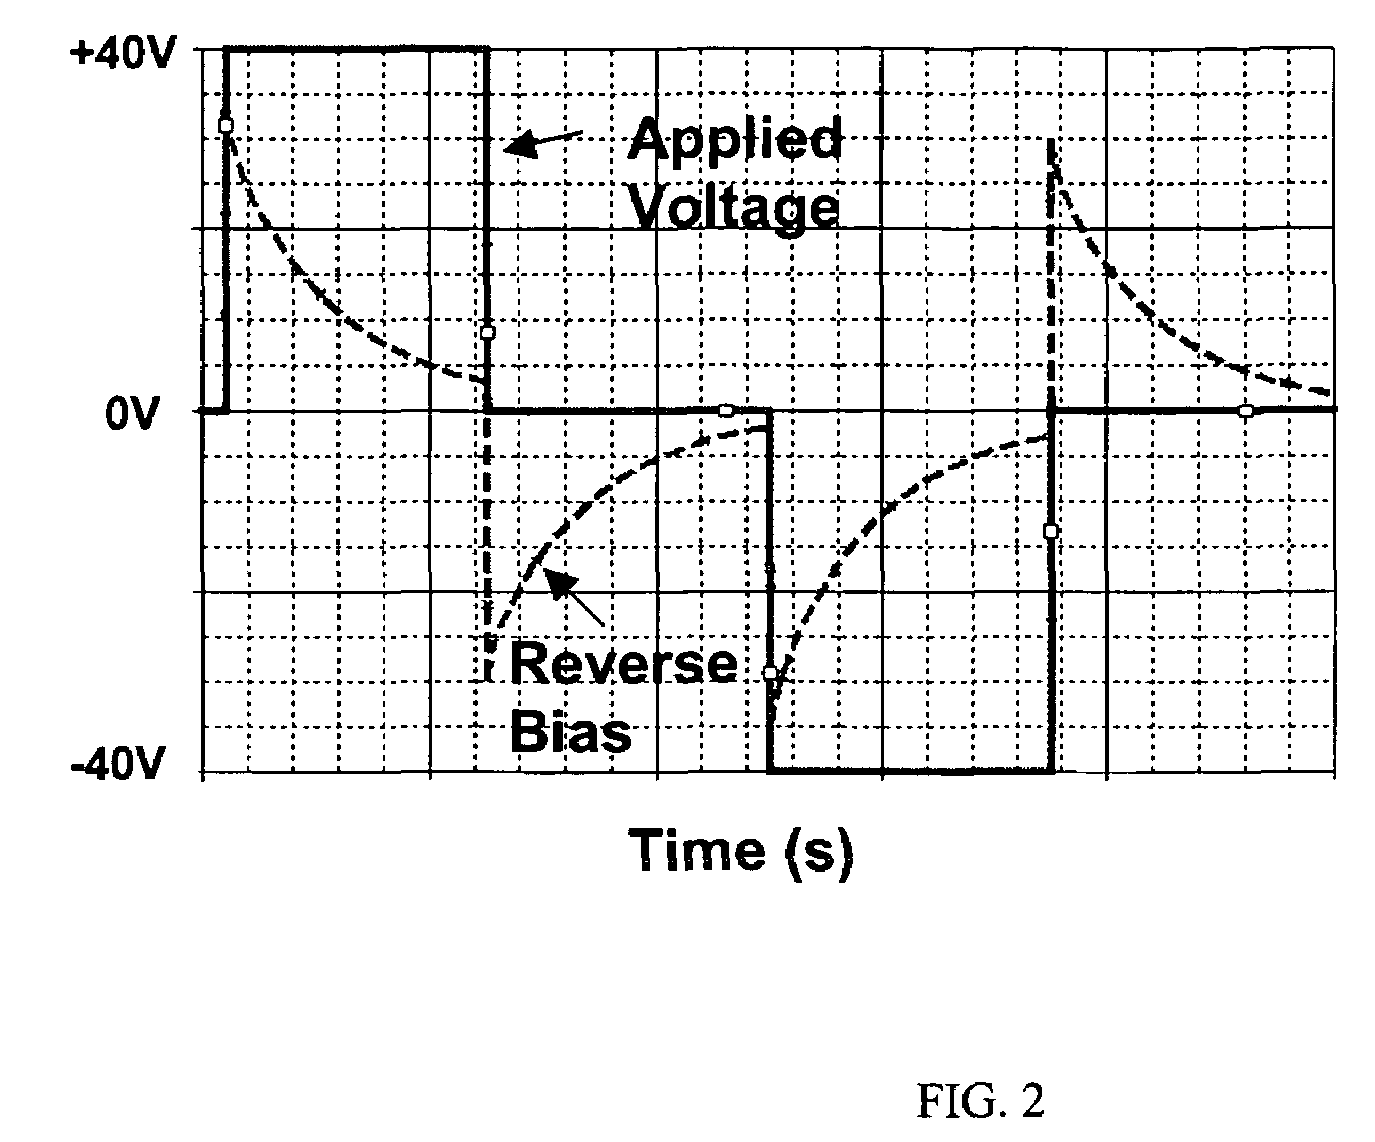 Modification of electrical properties of display cells for improving electrophoretic display performance